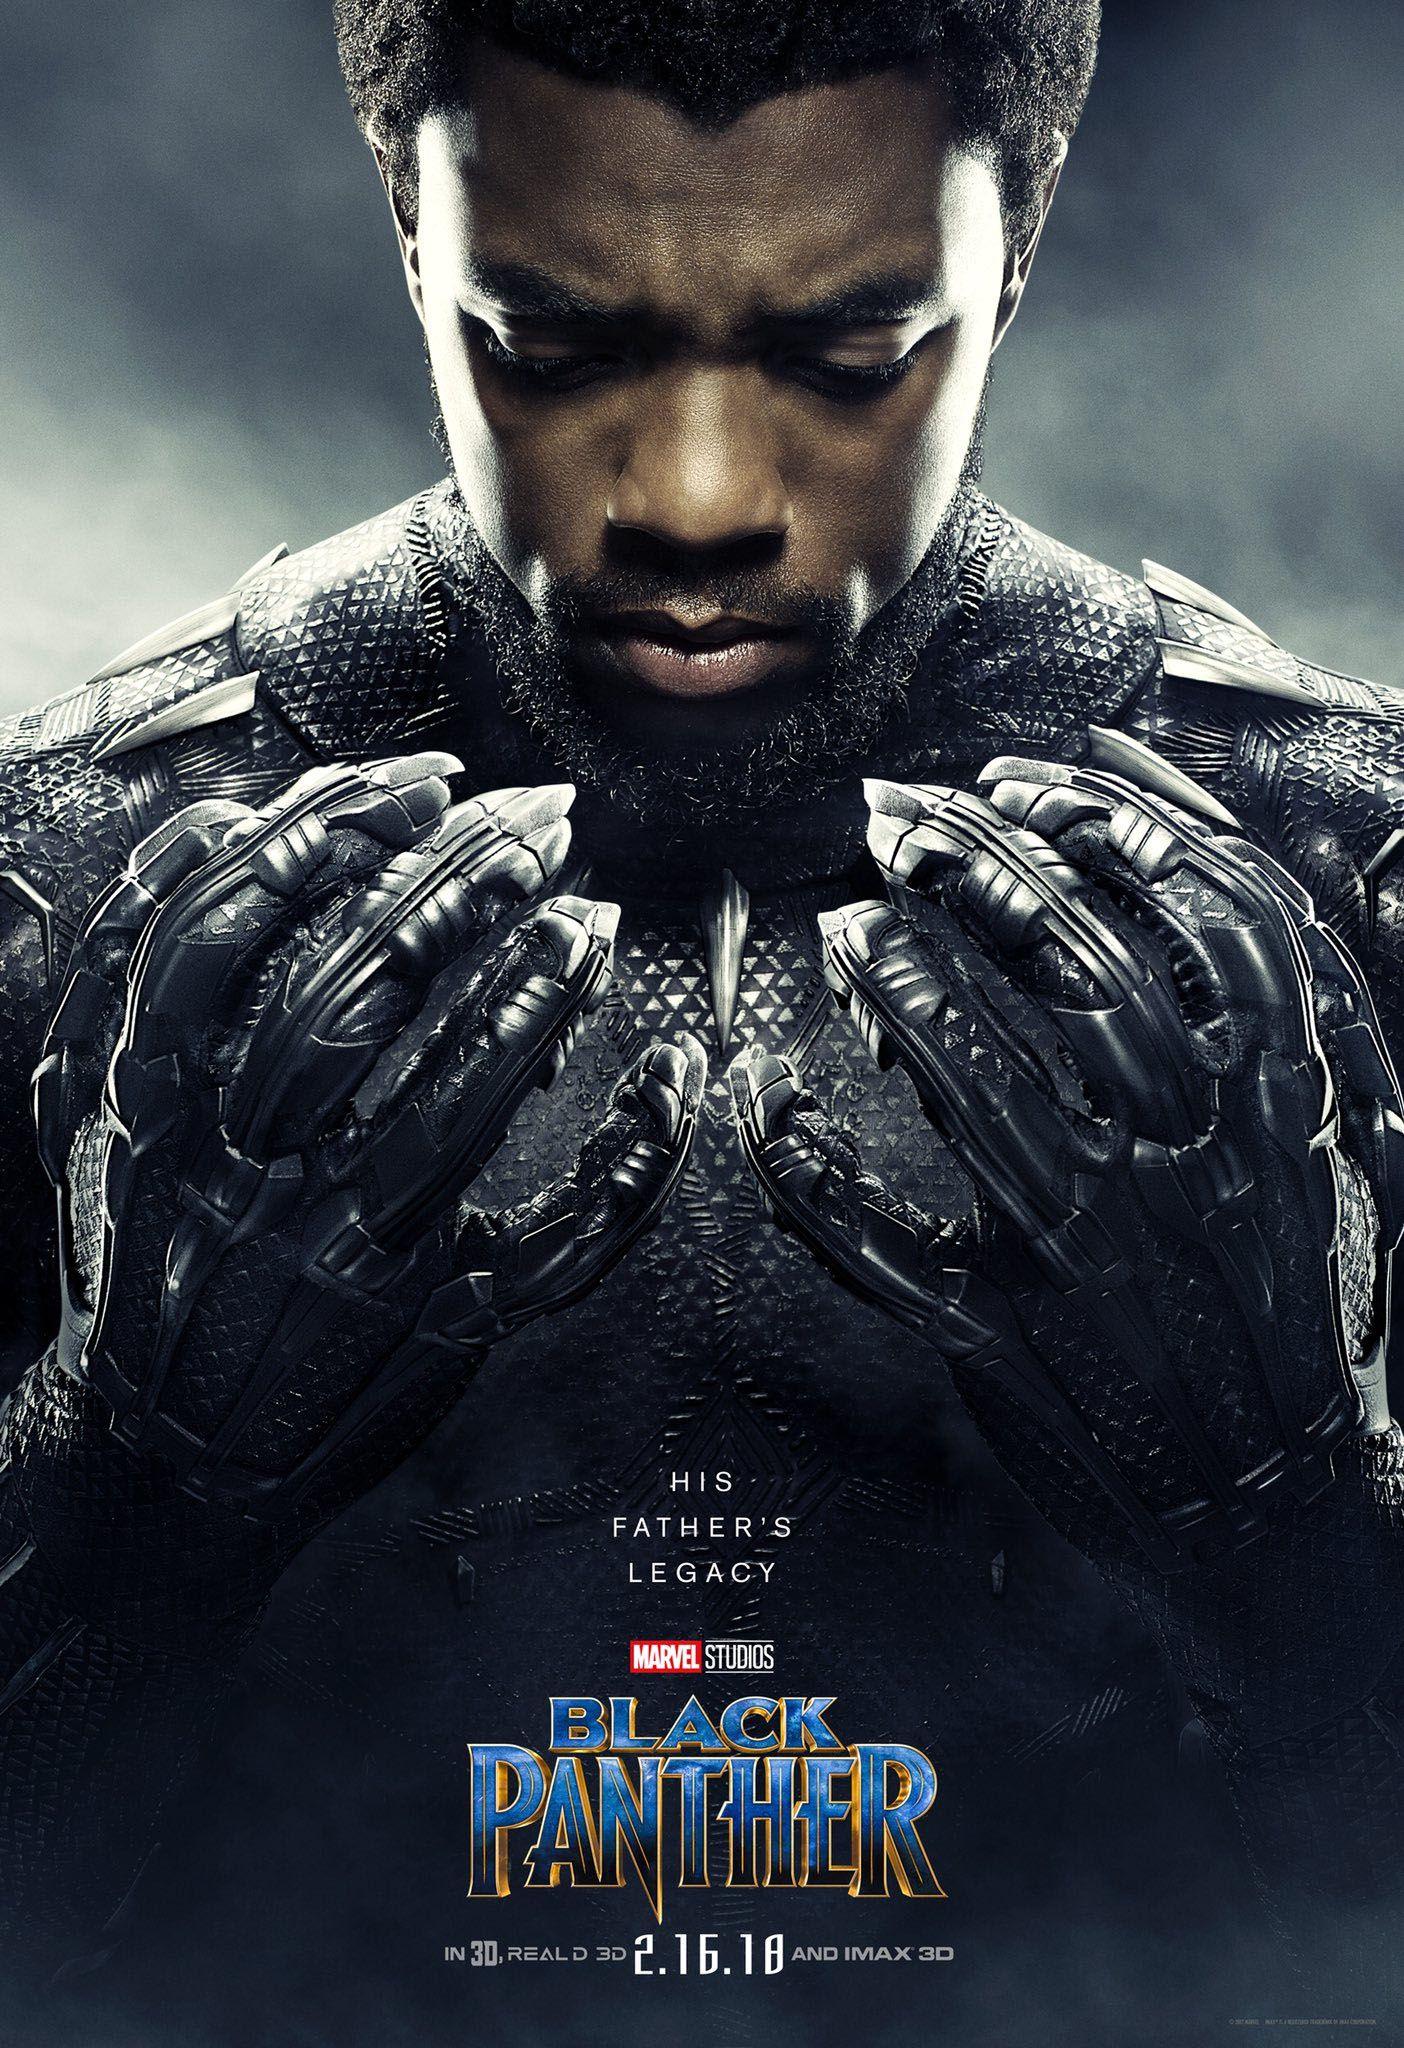 BLACK PANTHER Character Posters Embrace “Wakanda Forever”